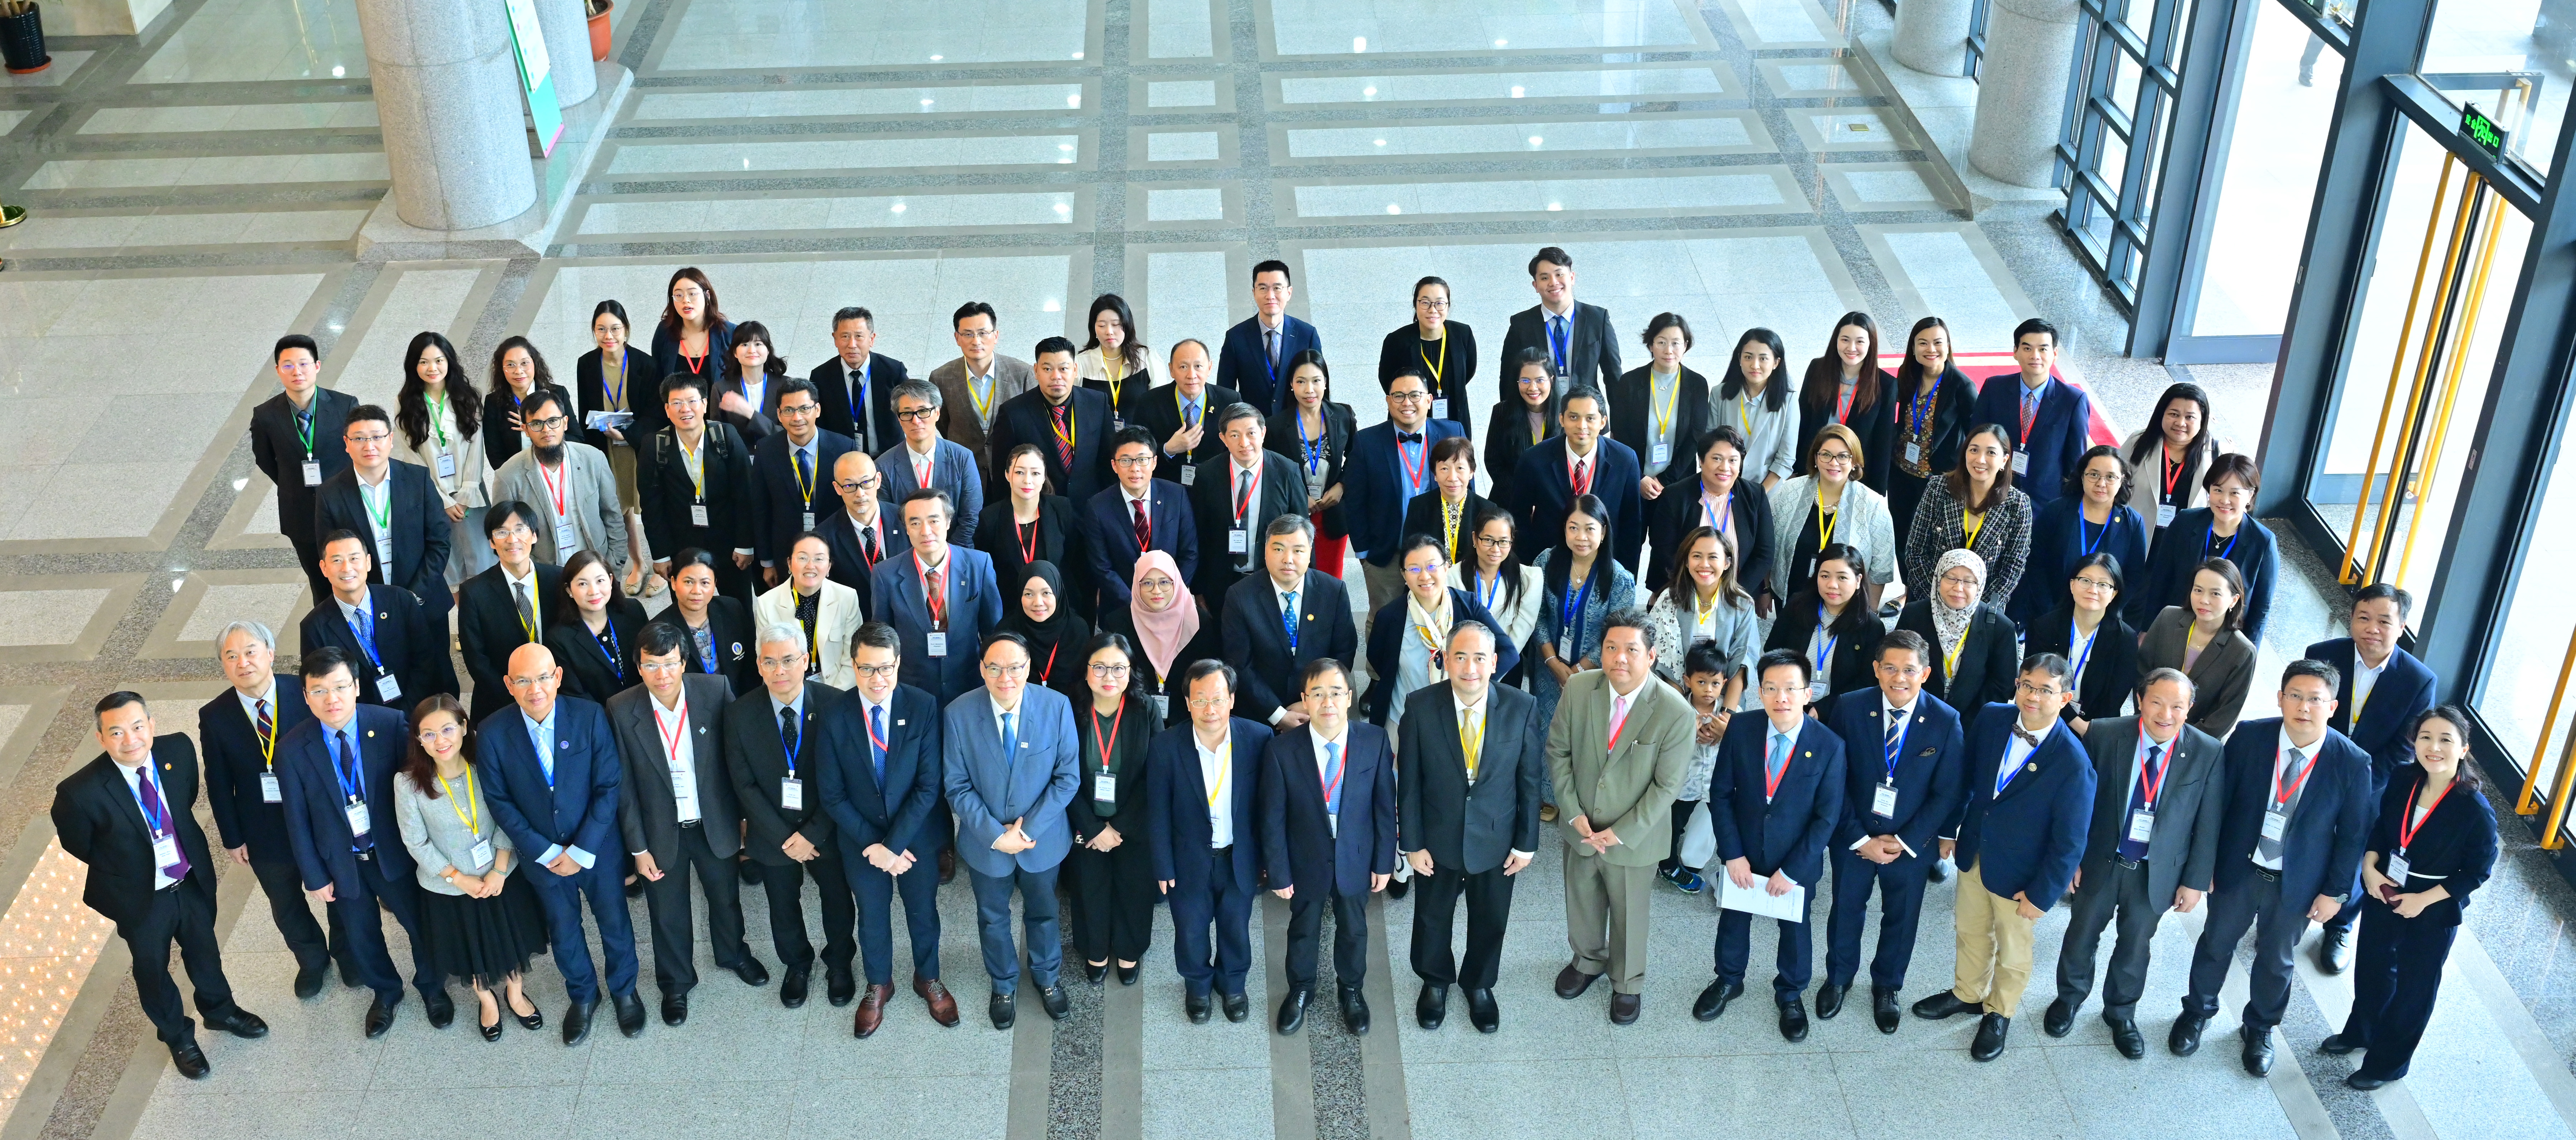 The 11th ASEAN+3 Heads of International Relations Meeting Deepens Higher Education Cooperation in Fostering Sustainable Growth and Solidarity Across the Region